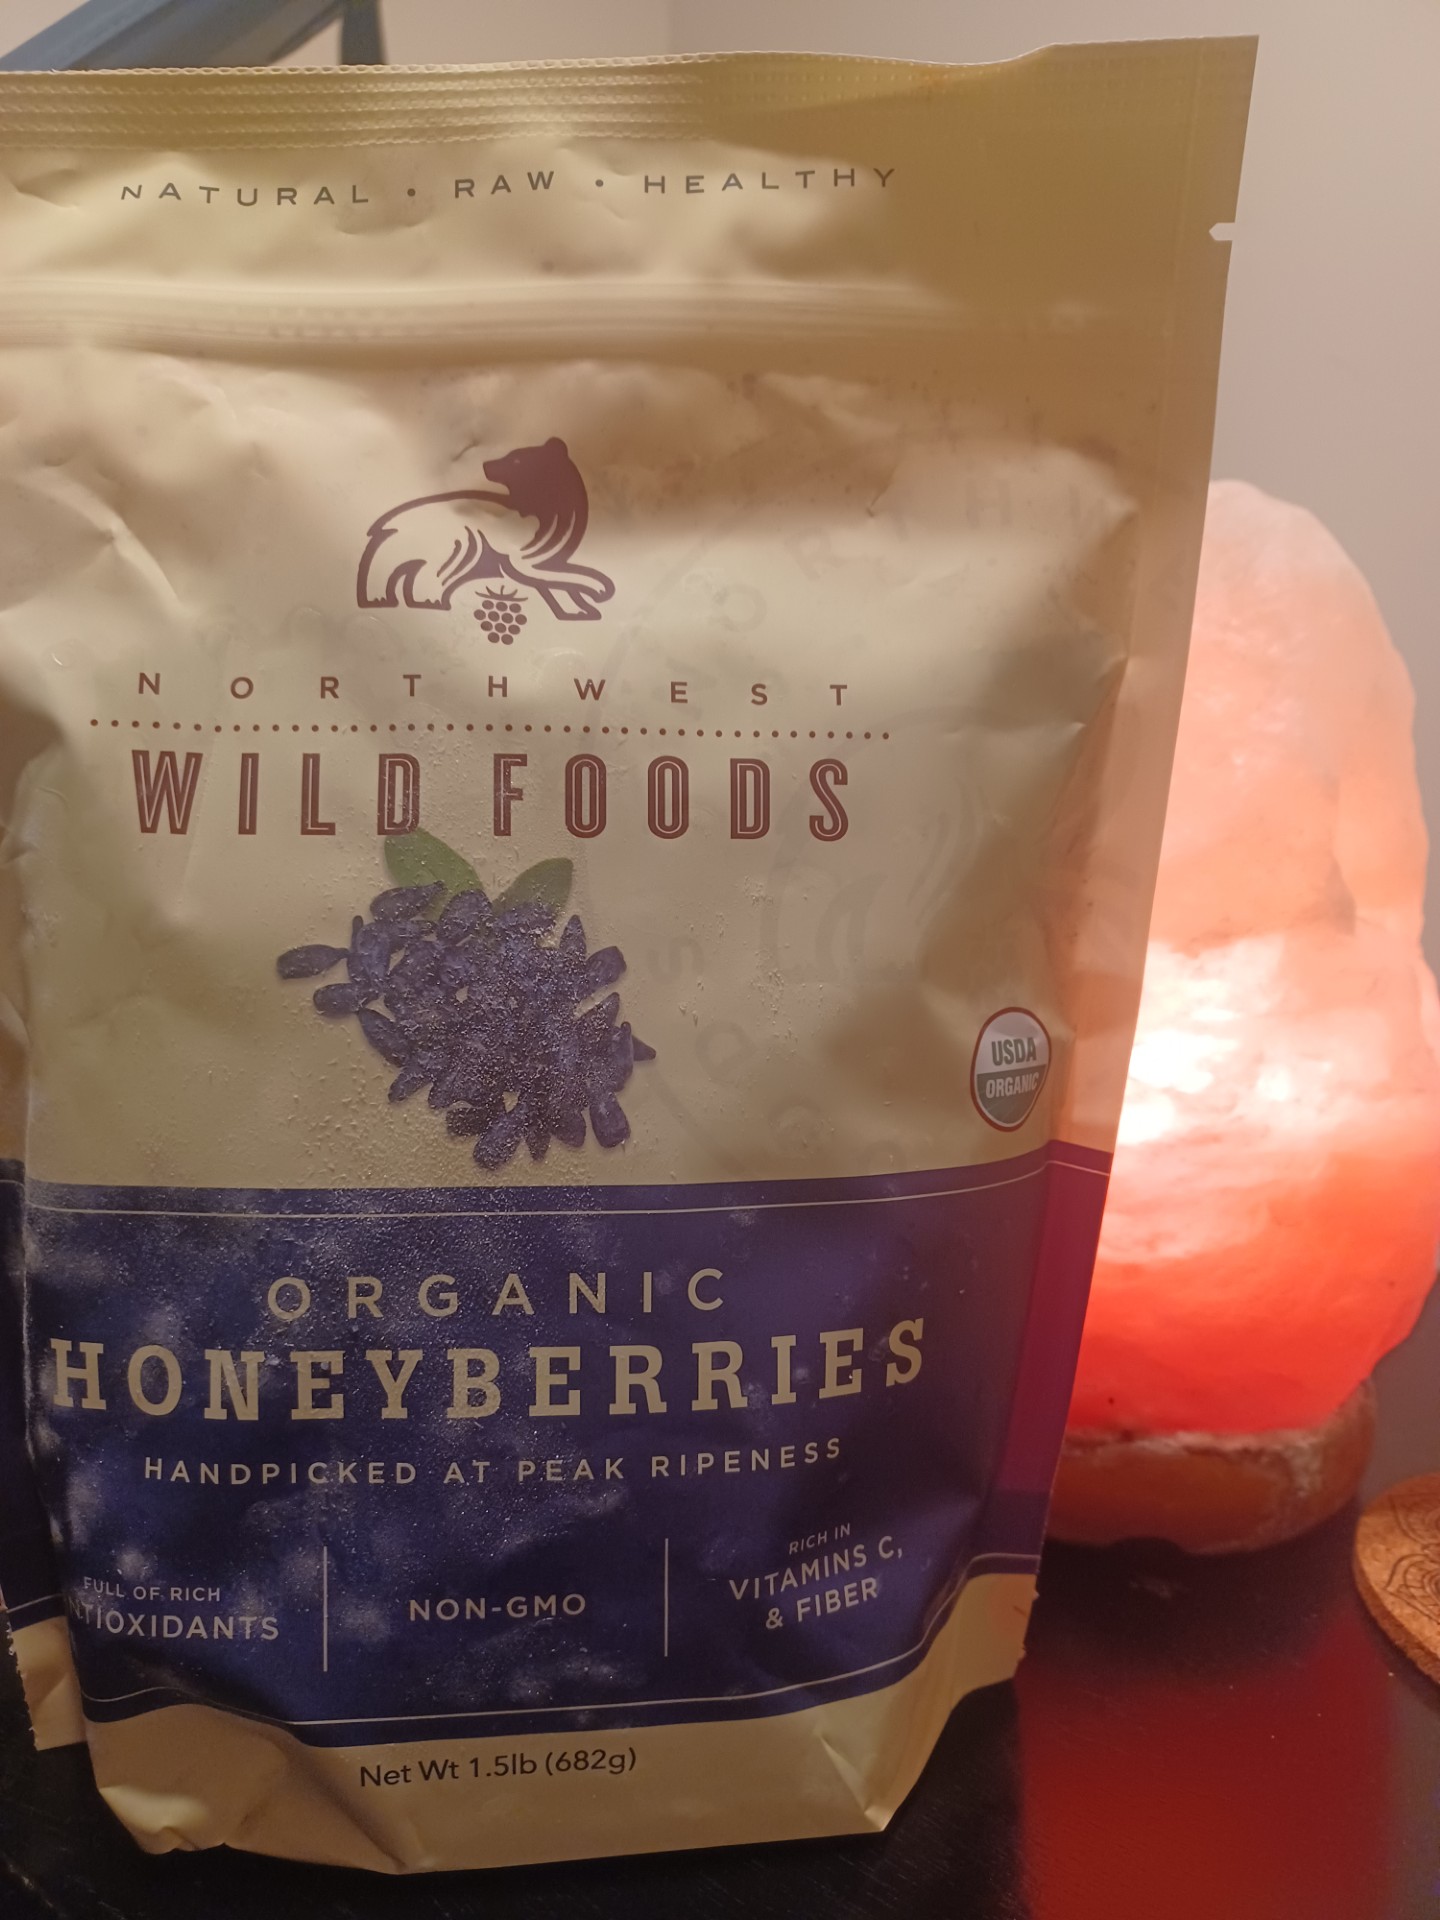 Honeyberries are one of the best foods made by Northwest Wild Foods. 